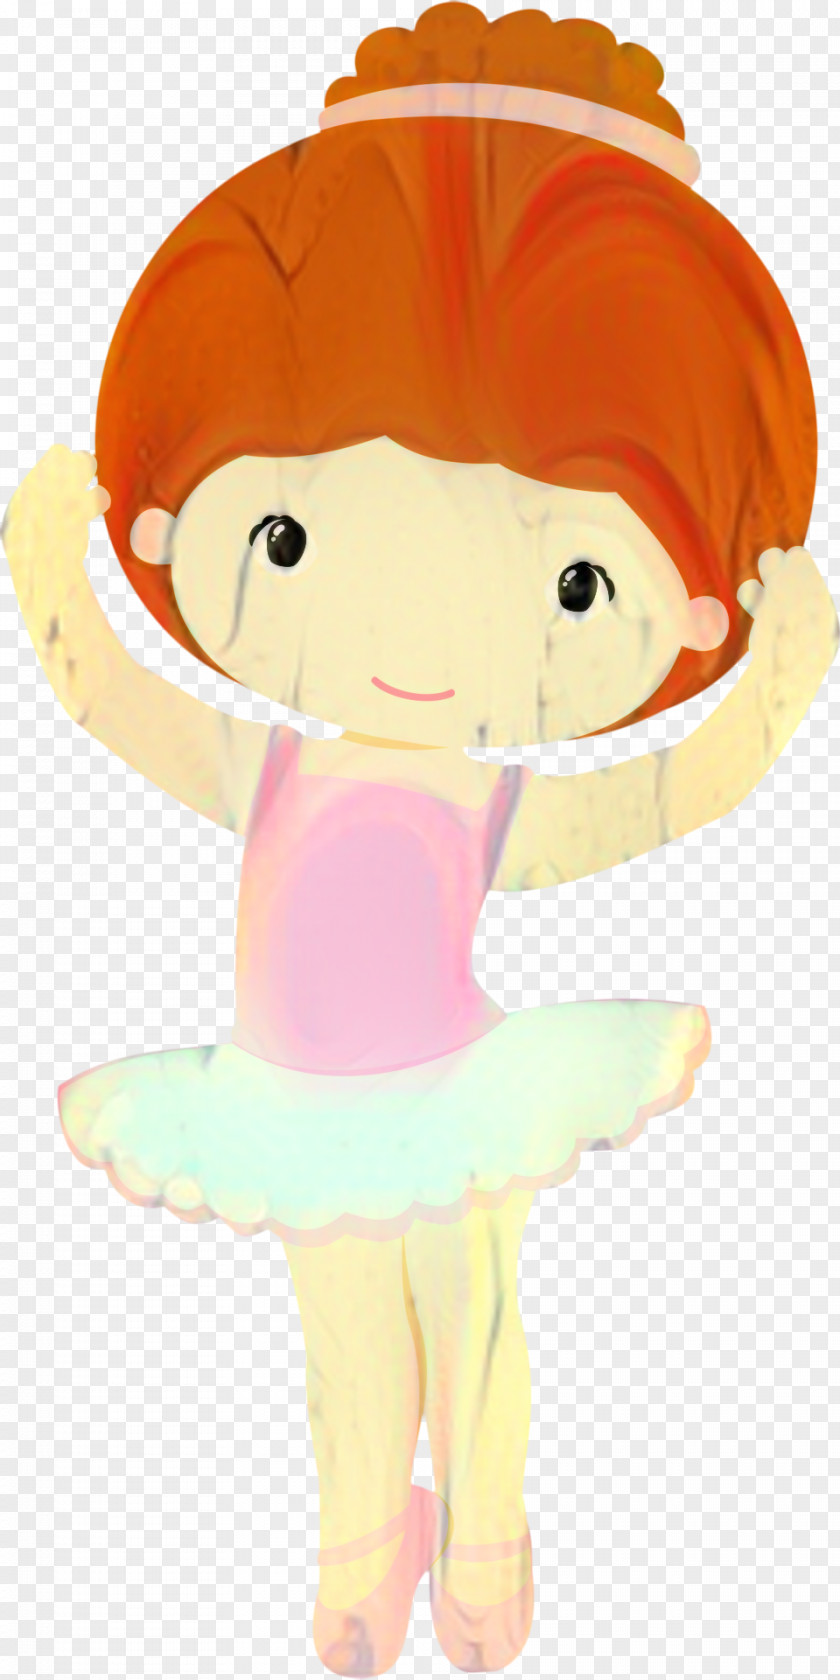 Pink Pointe Technique Girl Cartoon PNG